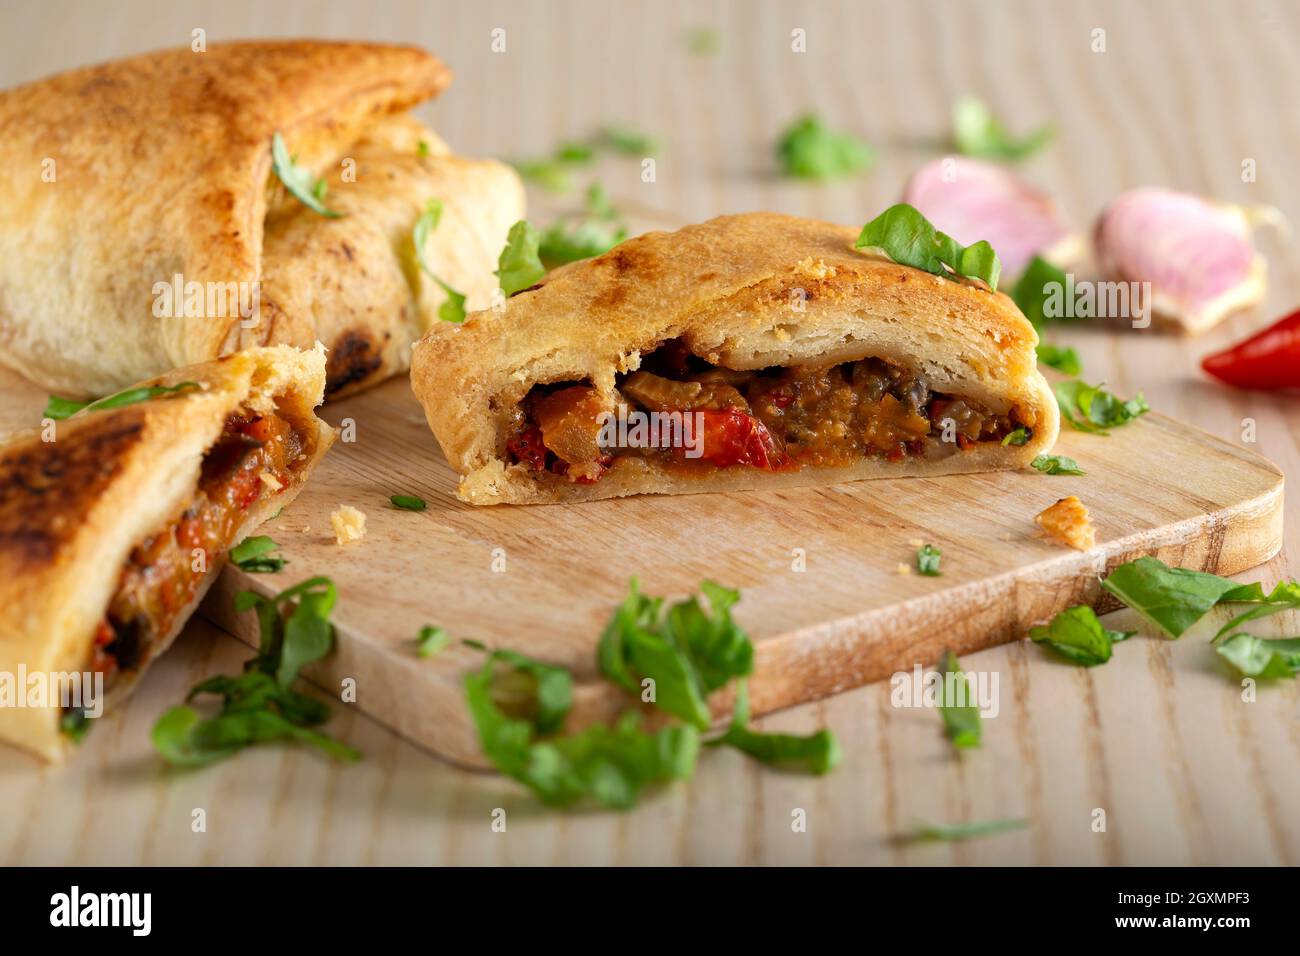 Puff pastry filled with vegetables on wooden cutting board with herbs - close up view Stock Photo